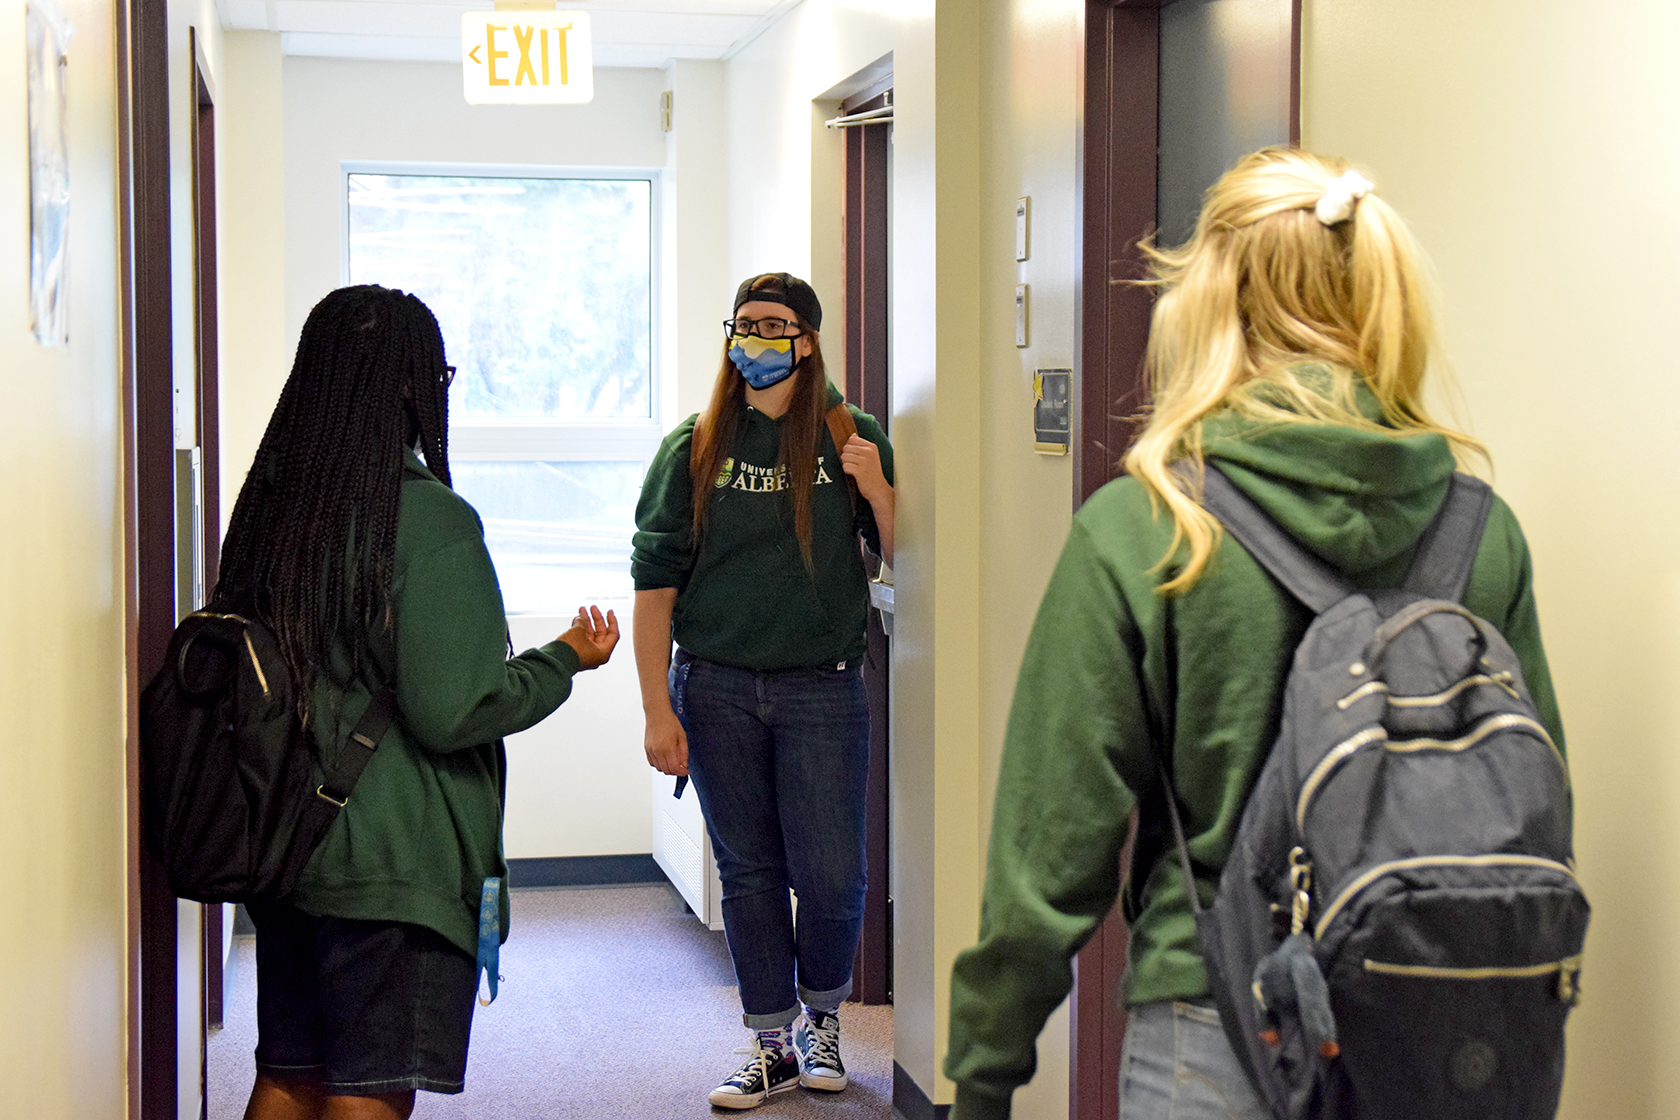 Residents wearing masks in the hall